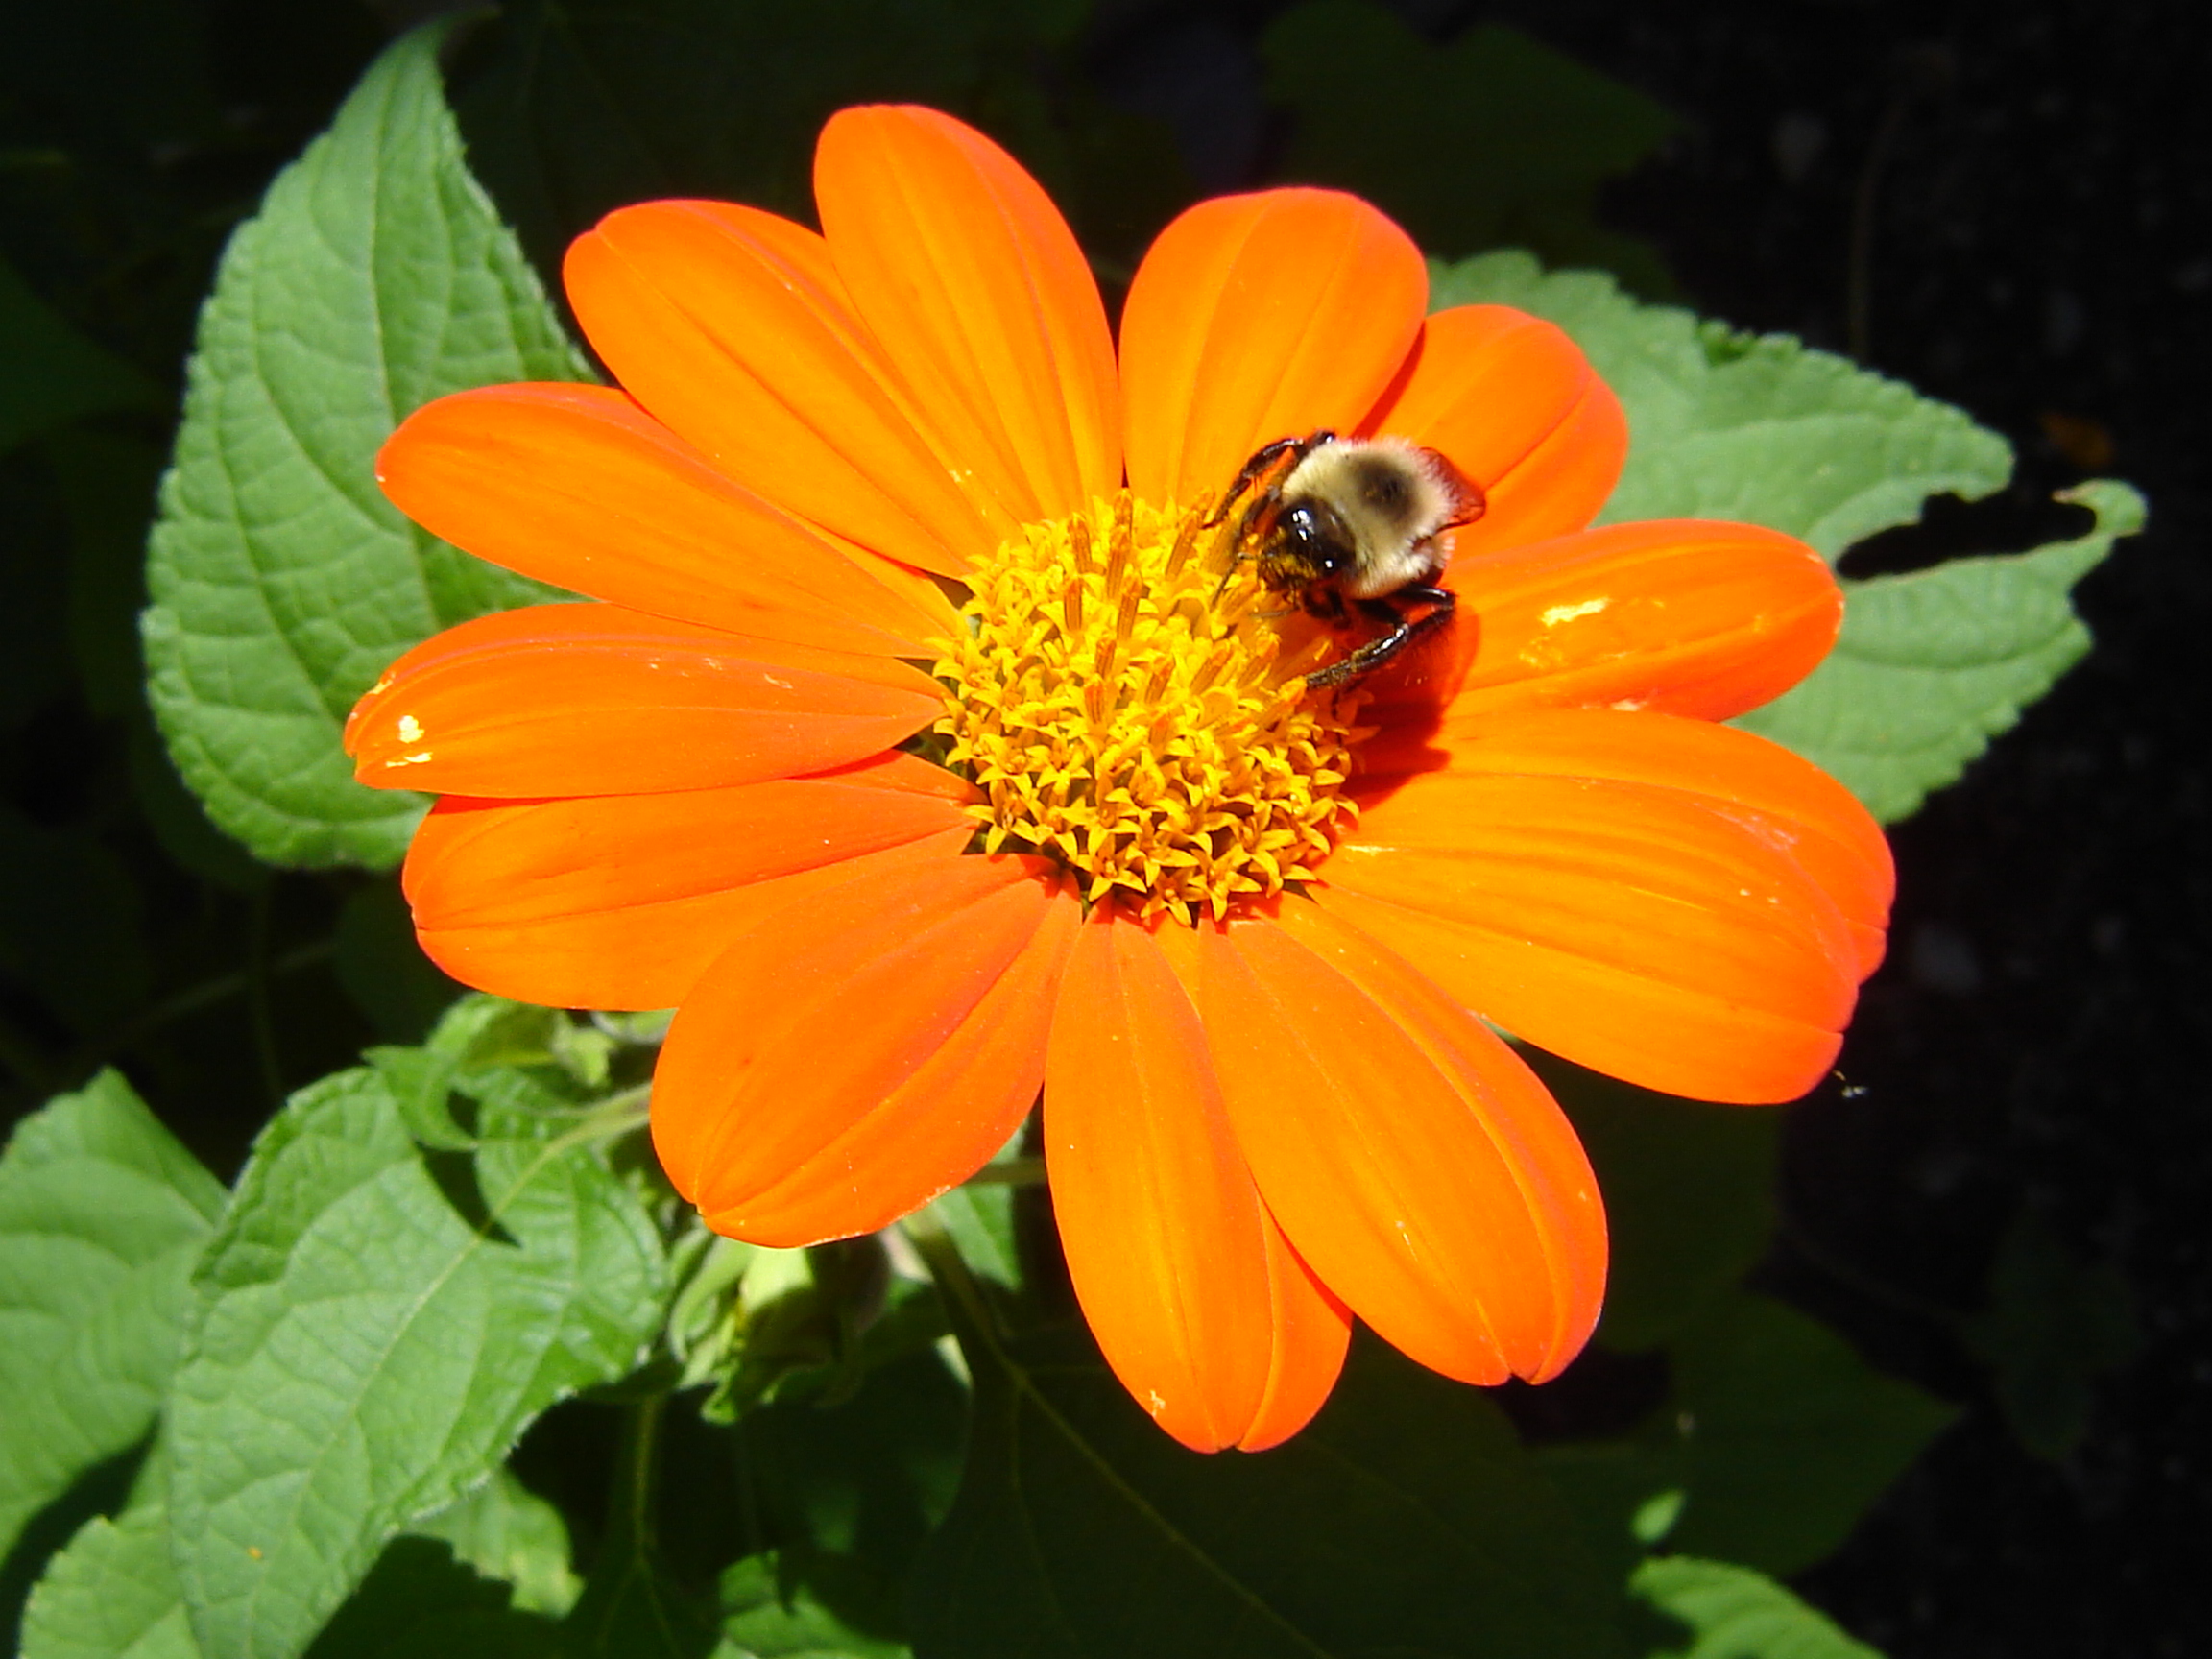 Mexican Sunflowers &amp; Bumble Bee (user submitted)